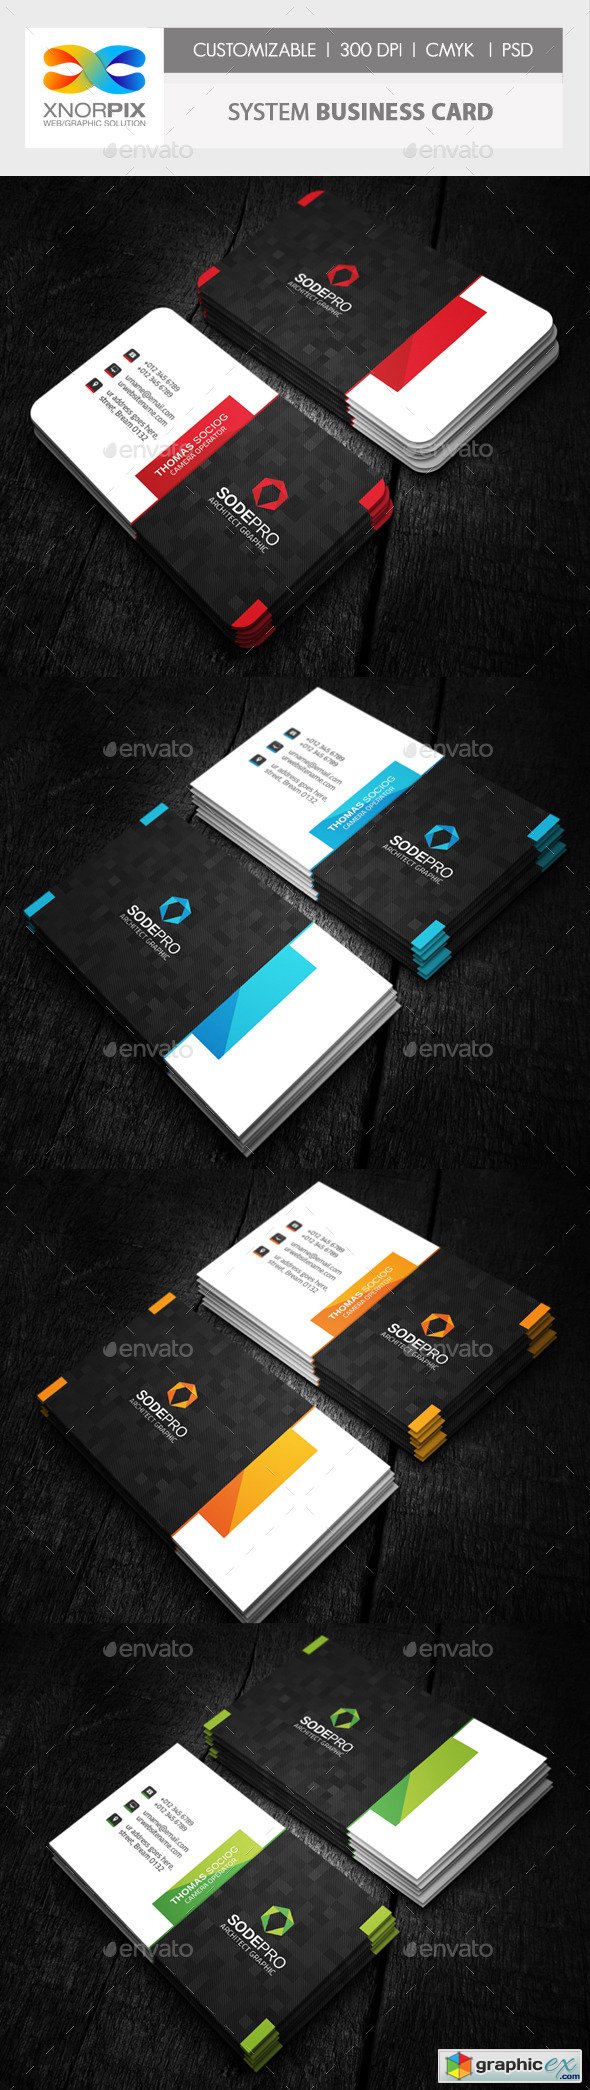 System Business Card